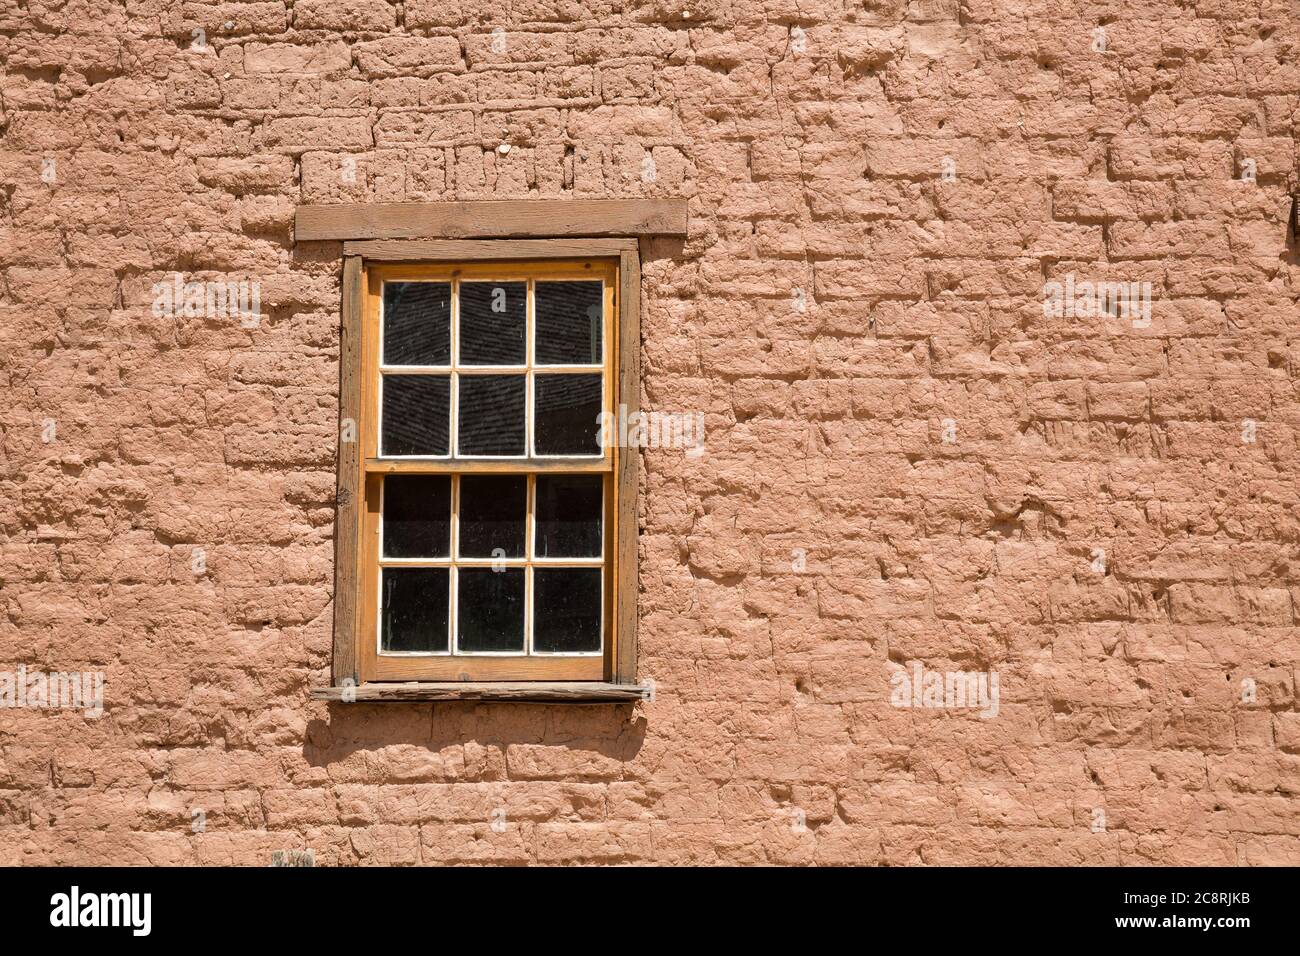 In a small ghost town in the Southern Utah wilderness, a wooden window is set into a red brick building. Stock Photo